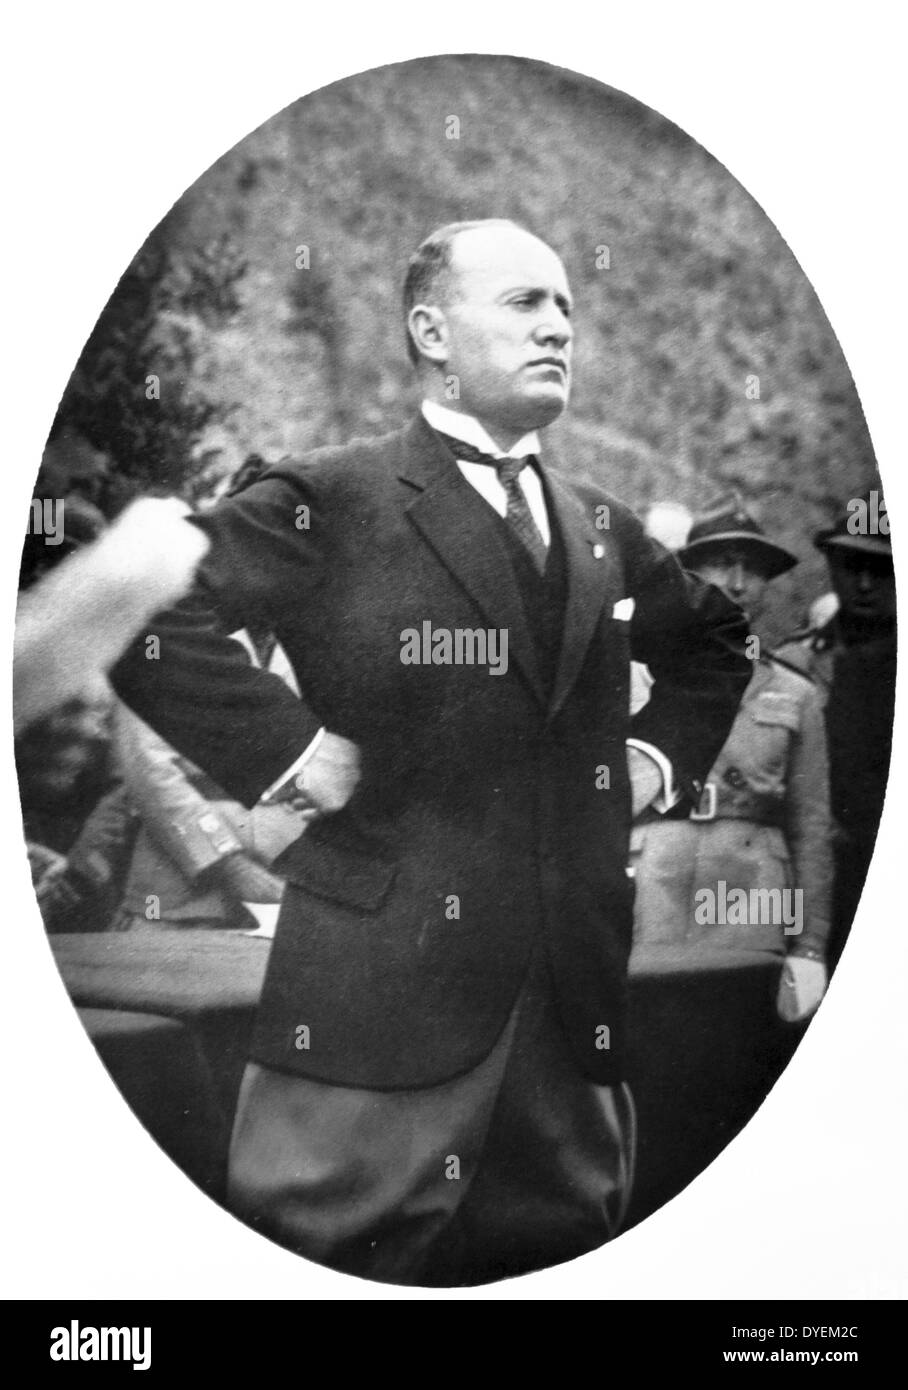 Benito Amilcare Andrea Mussolini was an Italian politician, journalist, and leader of the National Fascist Party, ruling the country as Prime Minister from 1922 until his ousting in 1943. Wikipedia Stock Photo